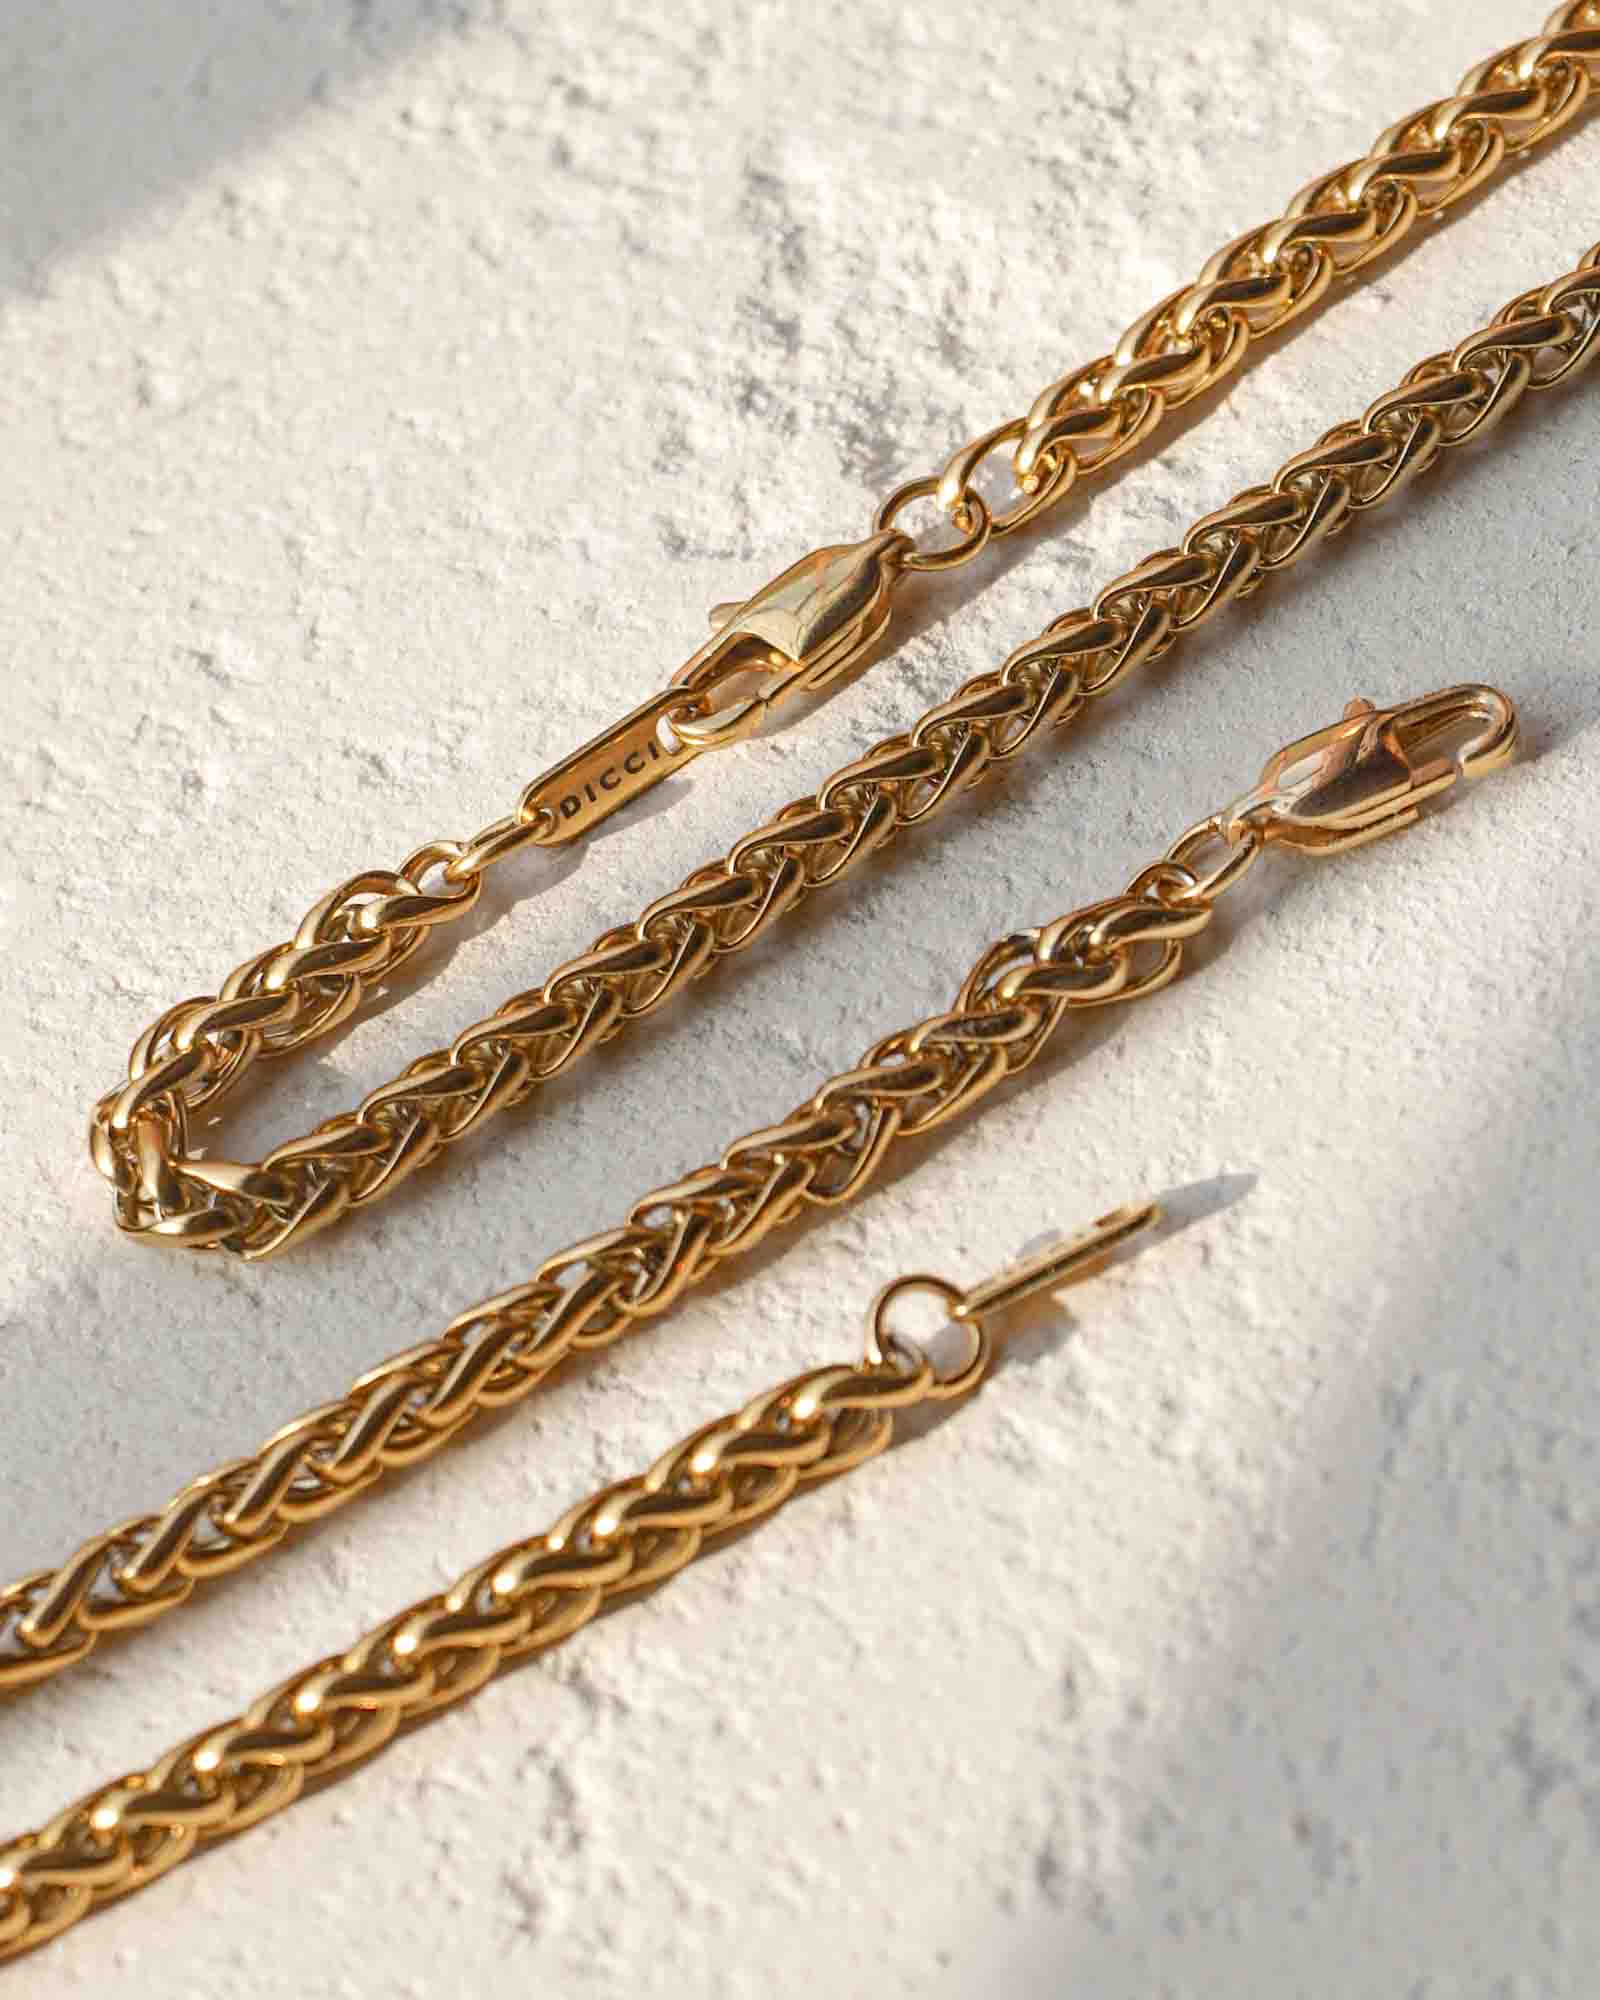 This golden bracelet is a slender band made from 316L of stainless steel. Lightweight and very elegant on the wrist.